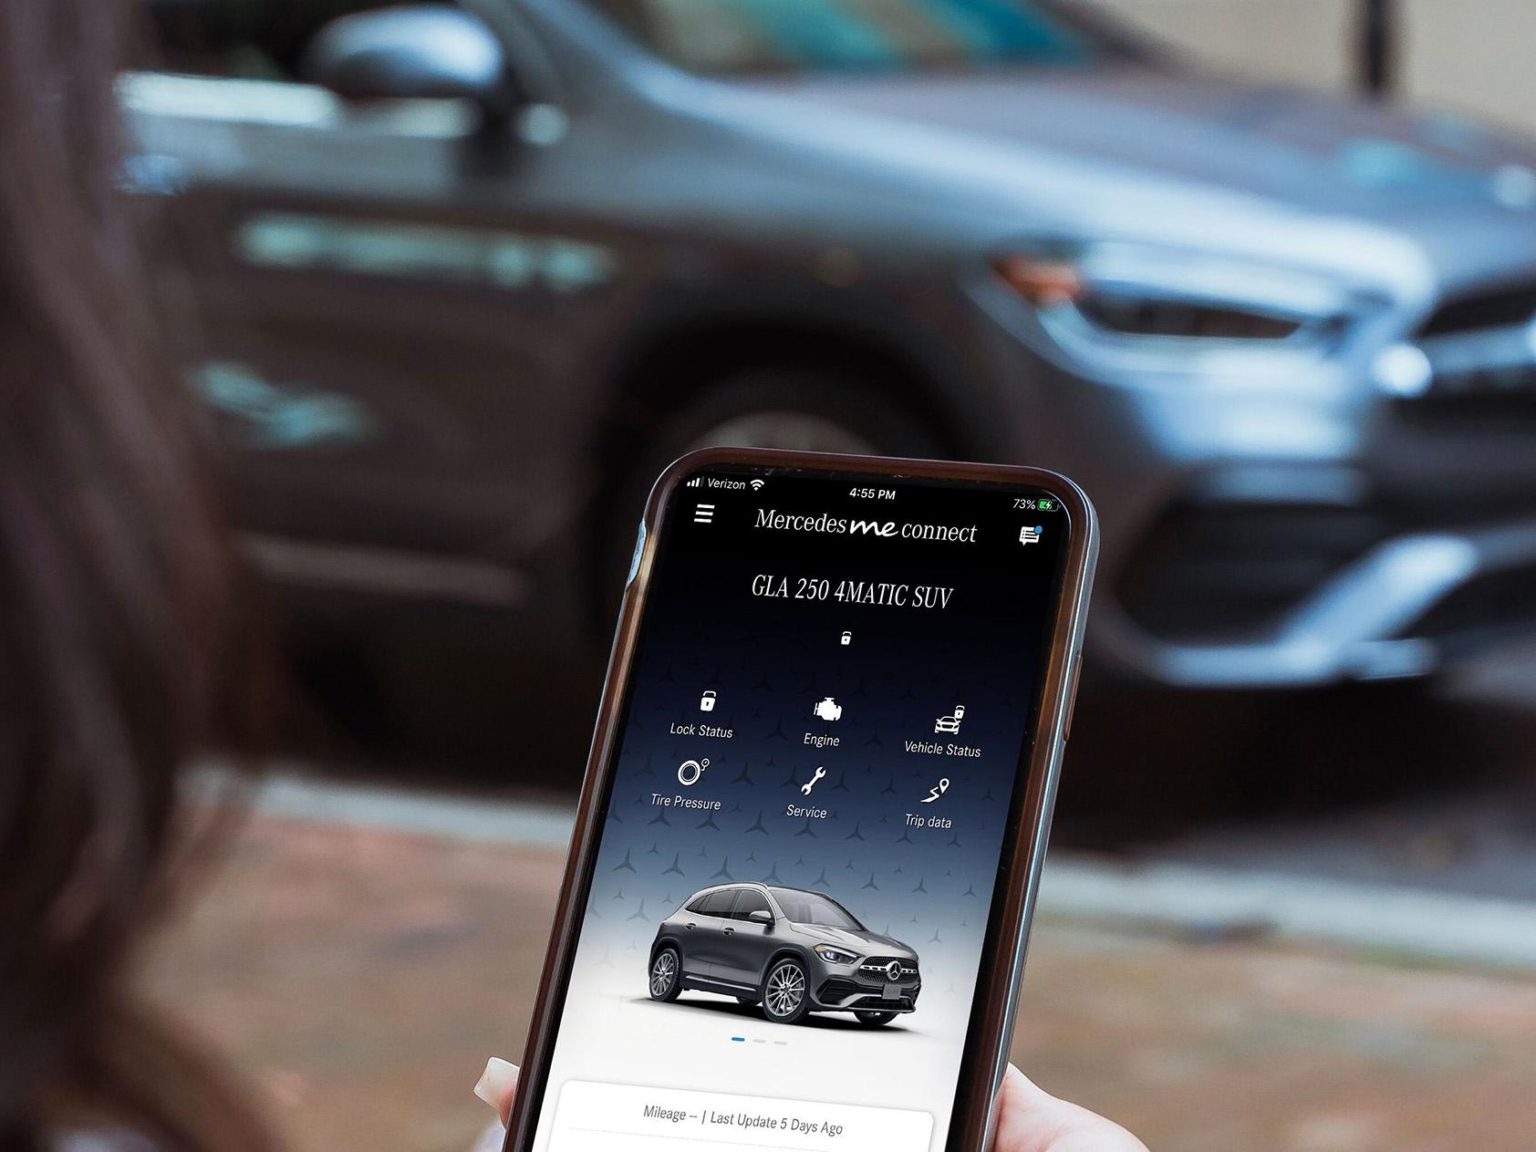 A new version of the Mercedes Me Connect app allows for added functionality.